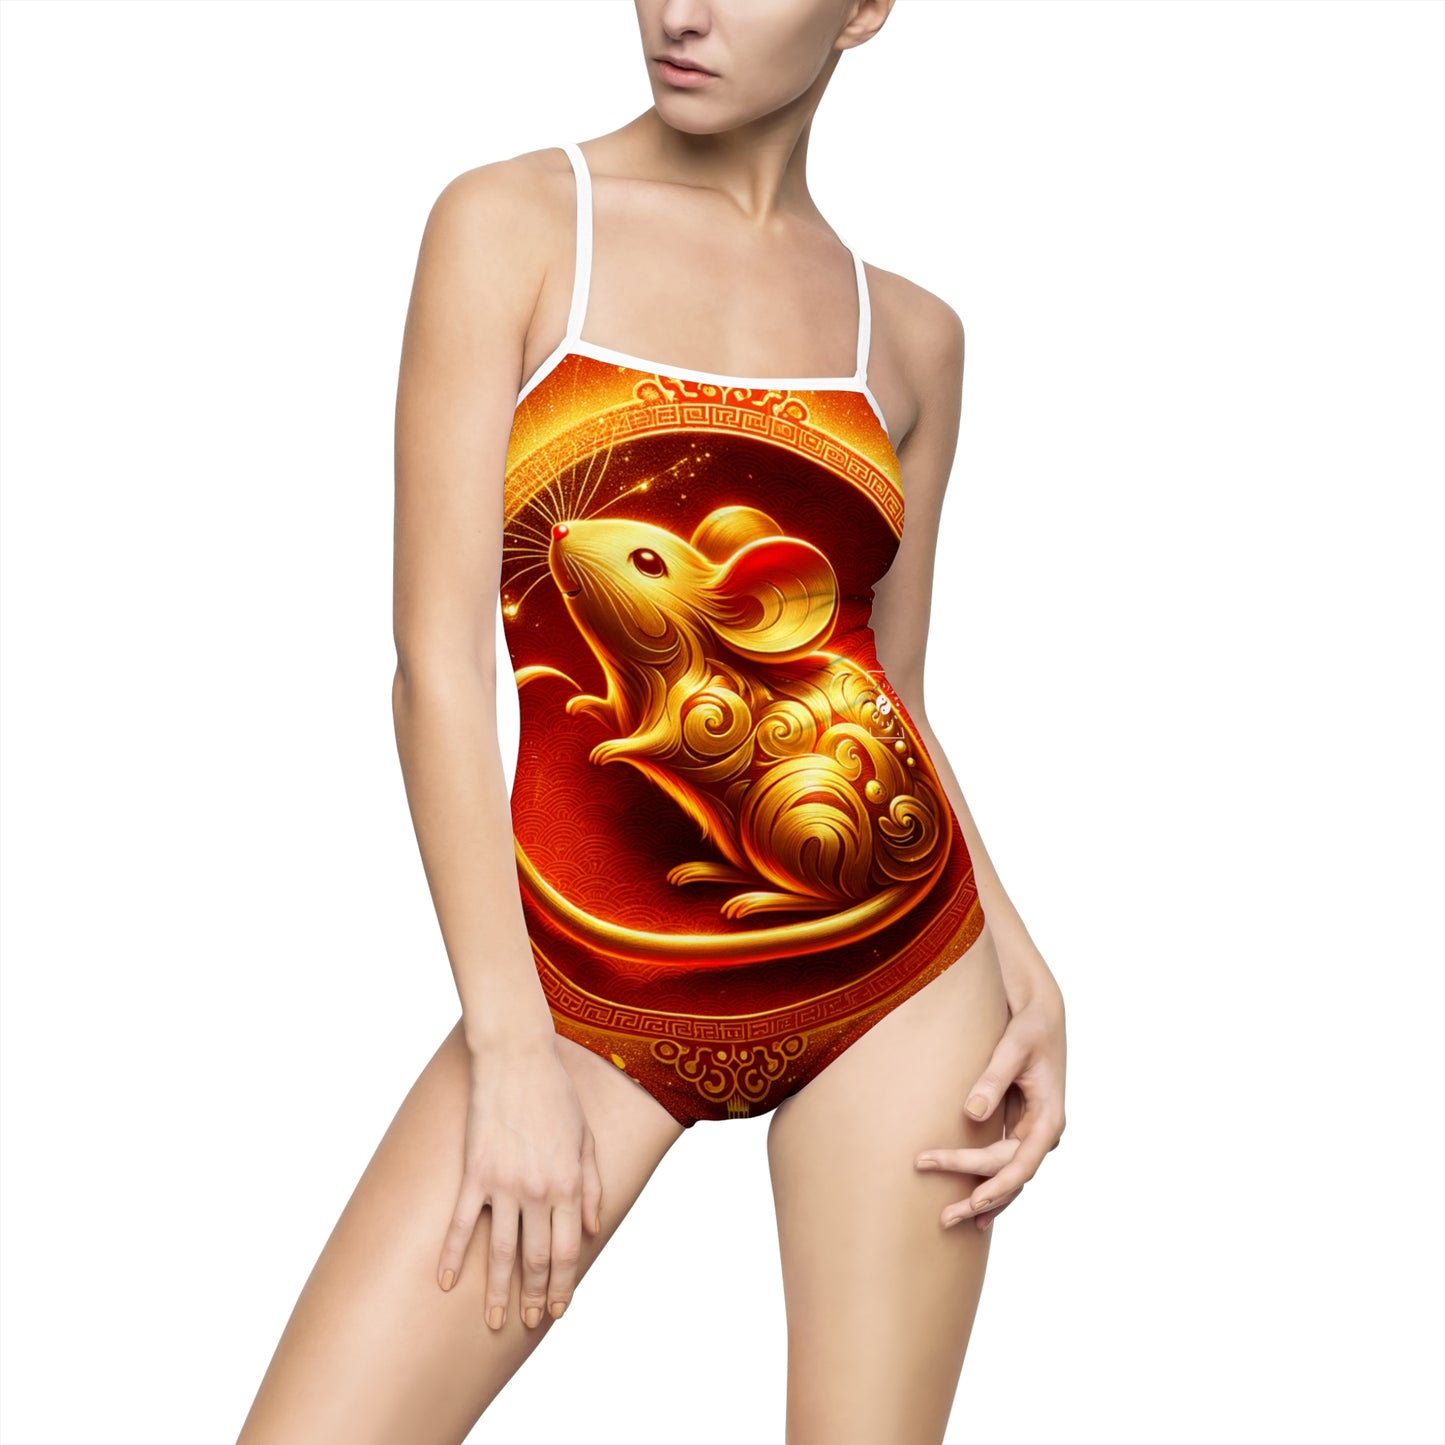 "Golden Emissary: A Lunar New Year's Tribute" - Openback Swimsuit